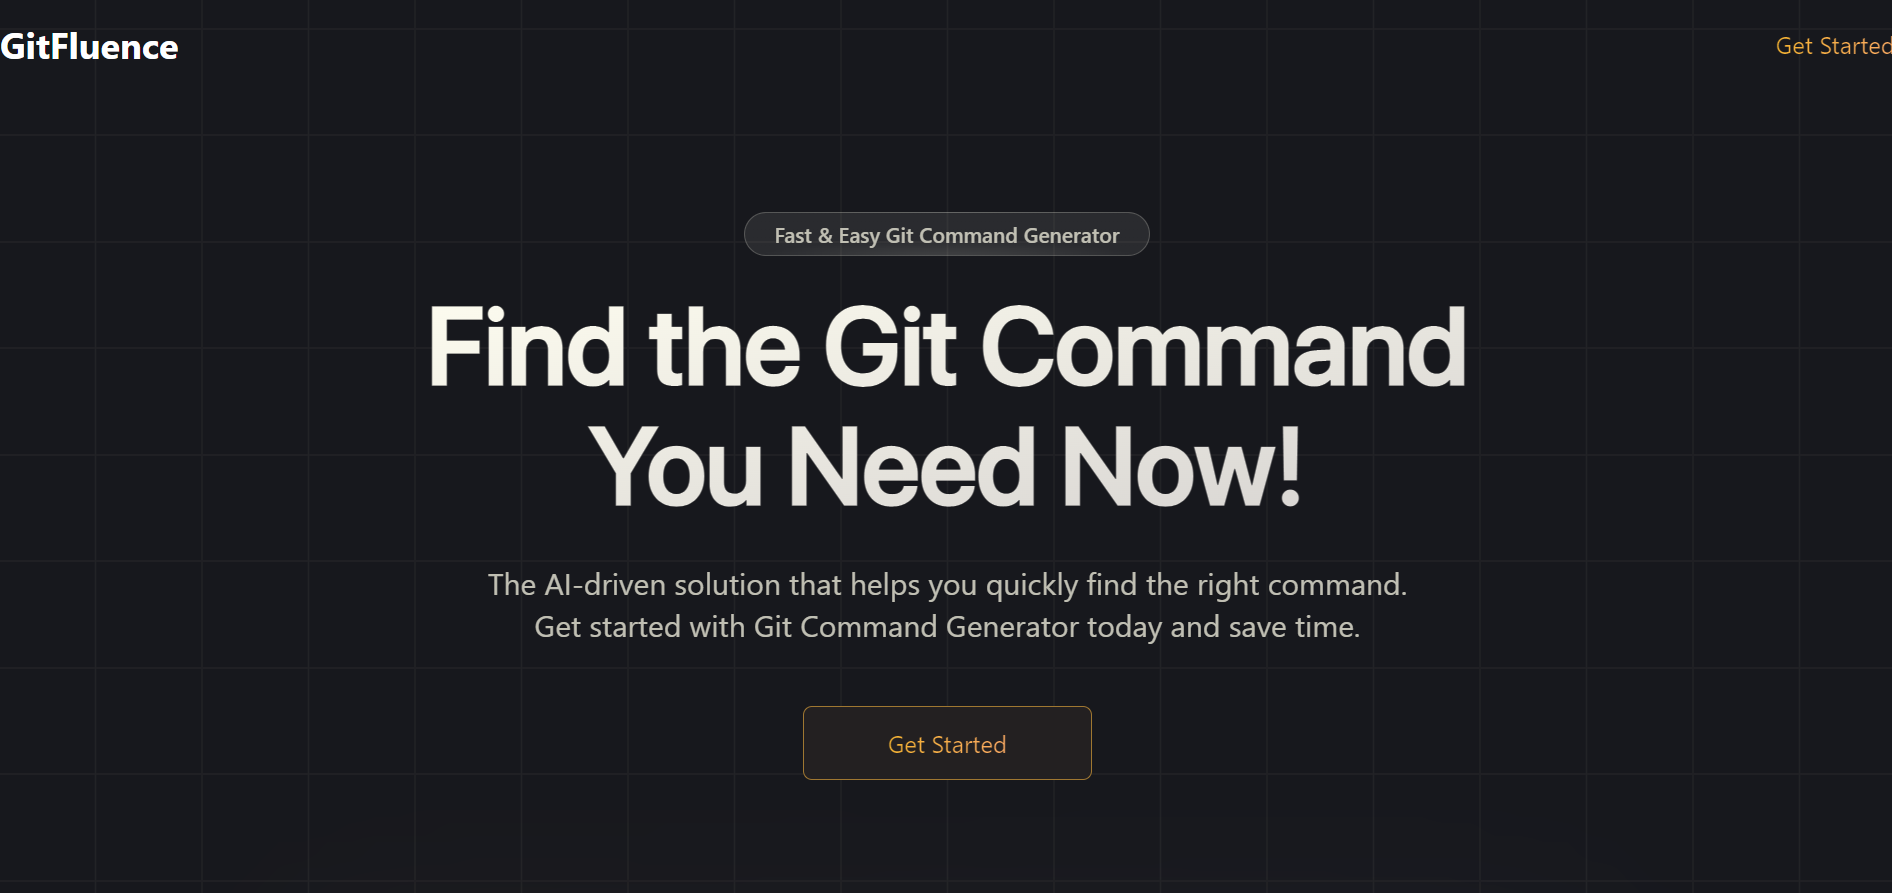 Stop Wasting Time Searching for Git Commands – GitFluence.com Has Your Back!